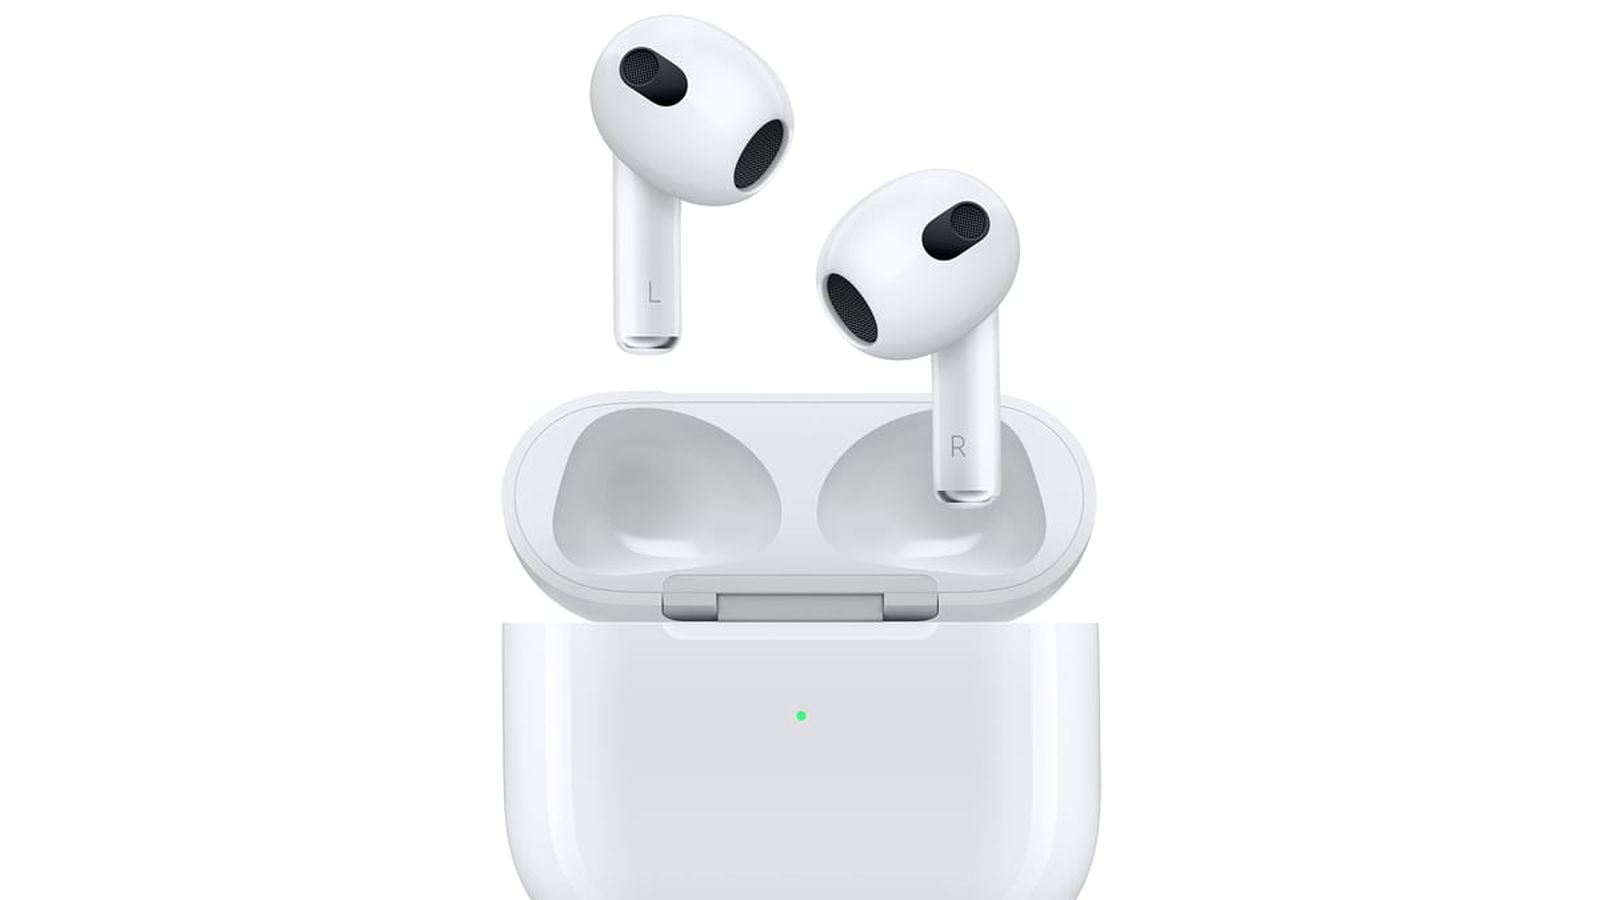 distress politician Reassure AirPods 3: Buyer's Guide, Should You Buy?